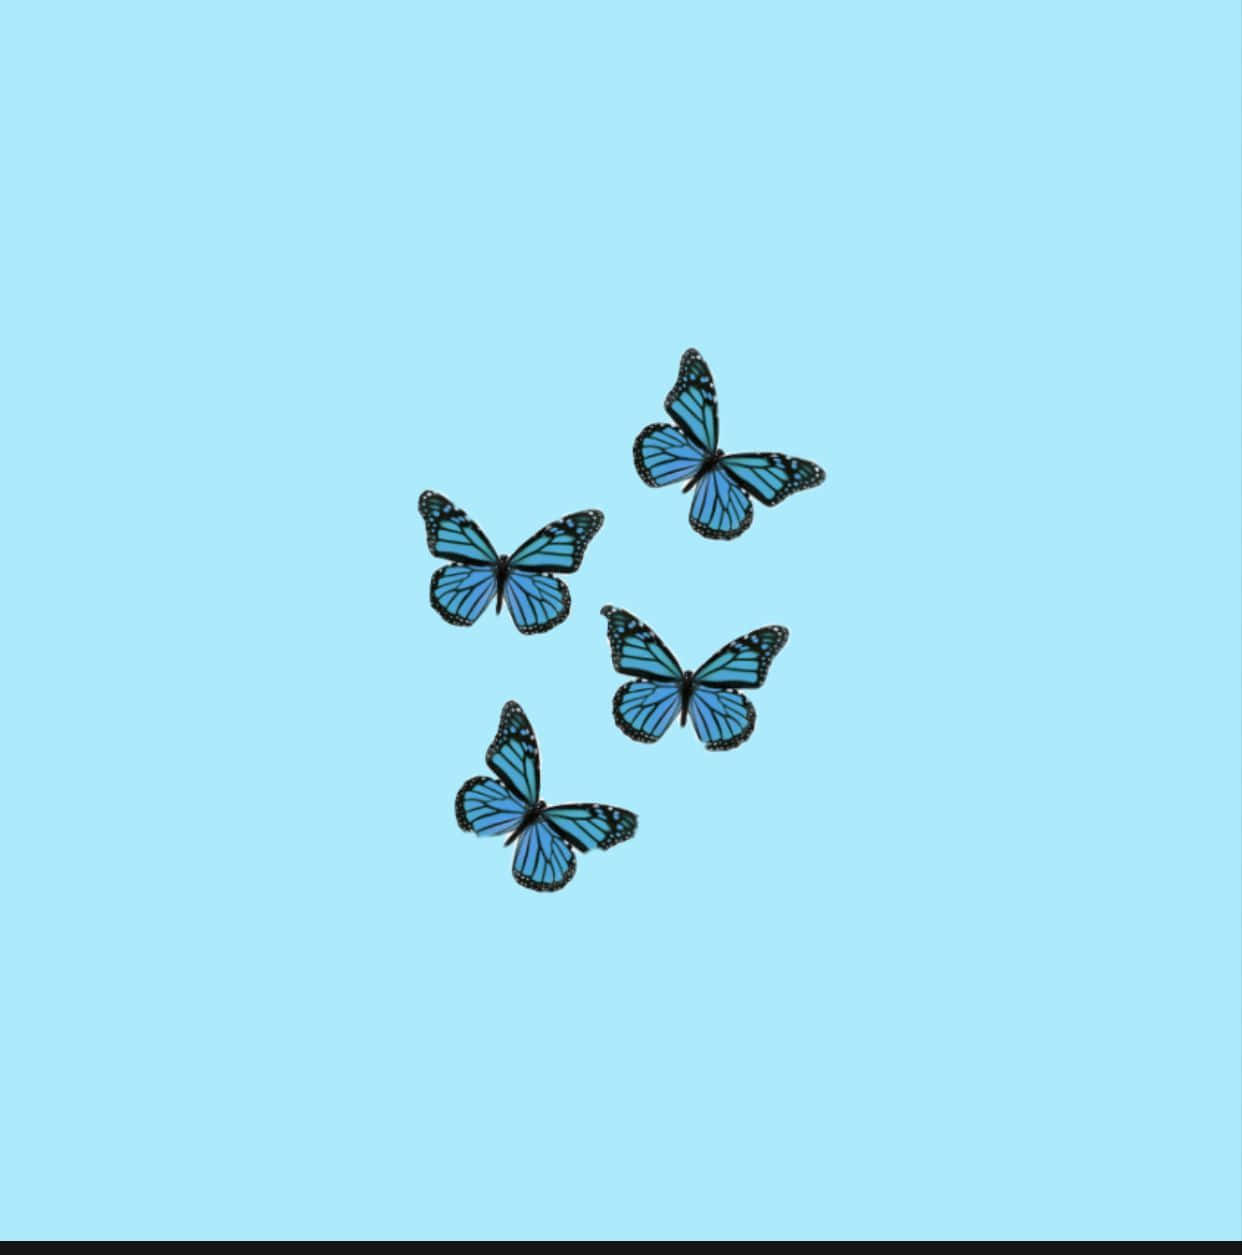 Enjoy the beauty of the Blue Butterfly